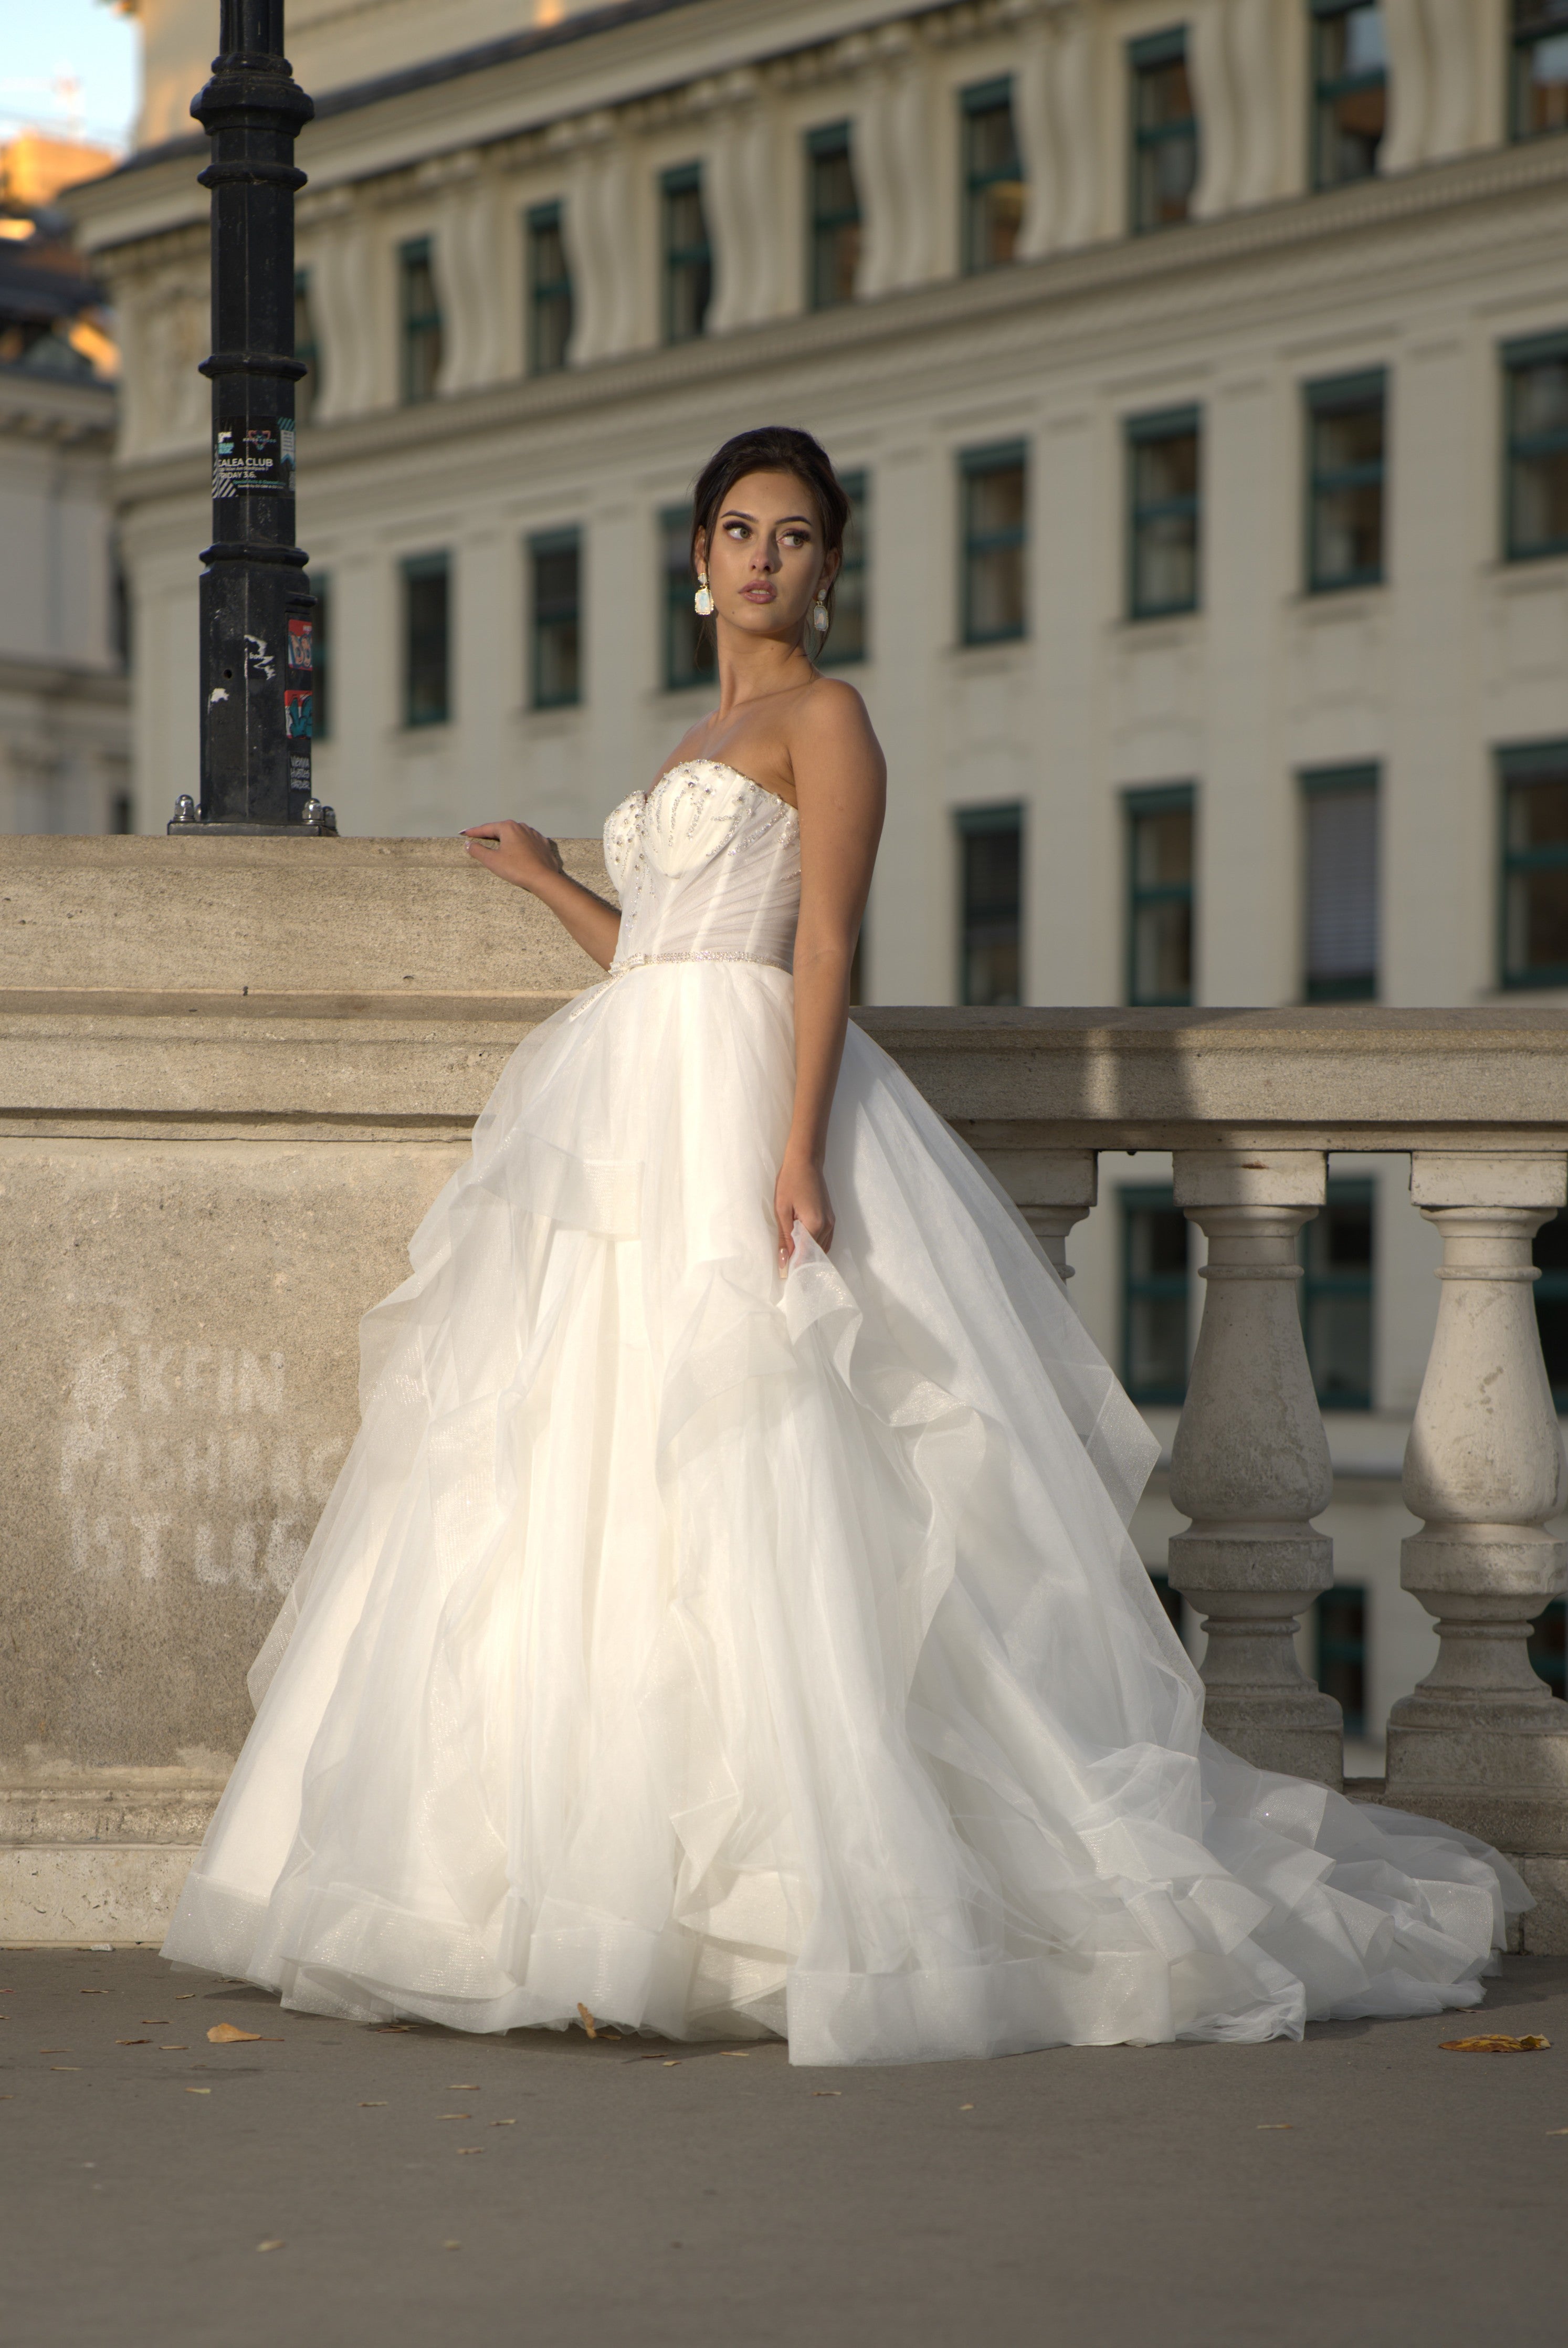 Bella - Strapless Sweetheart Ball Gown with Ruffle Skirt - Maxima Bridal